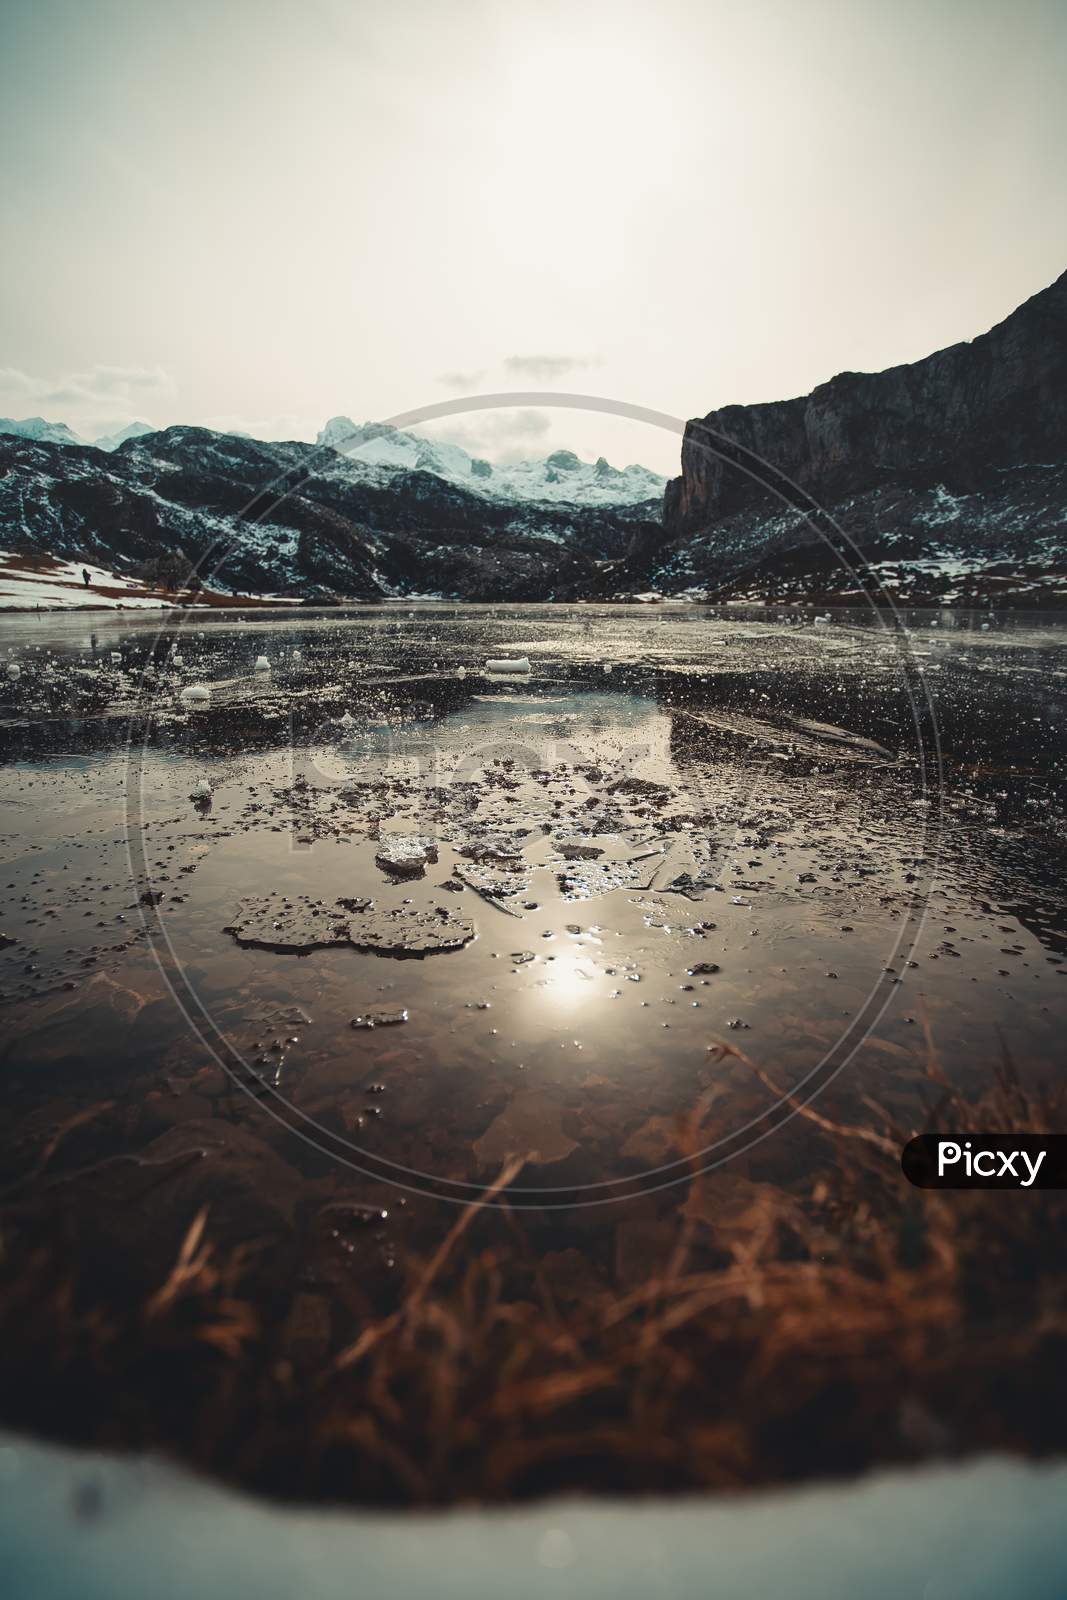 Frozen Water And Pieces Of Ice In A Frozen Lake In The Middle Of The Mountains During Winter